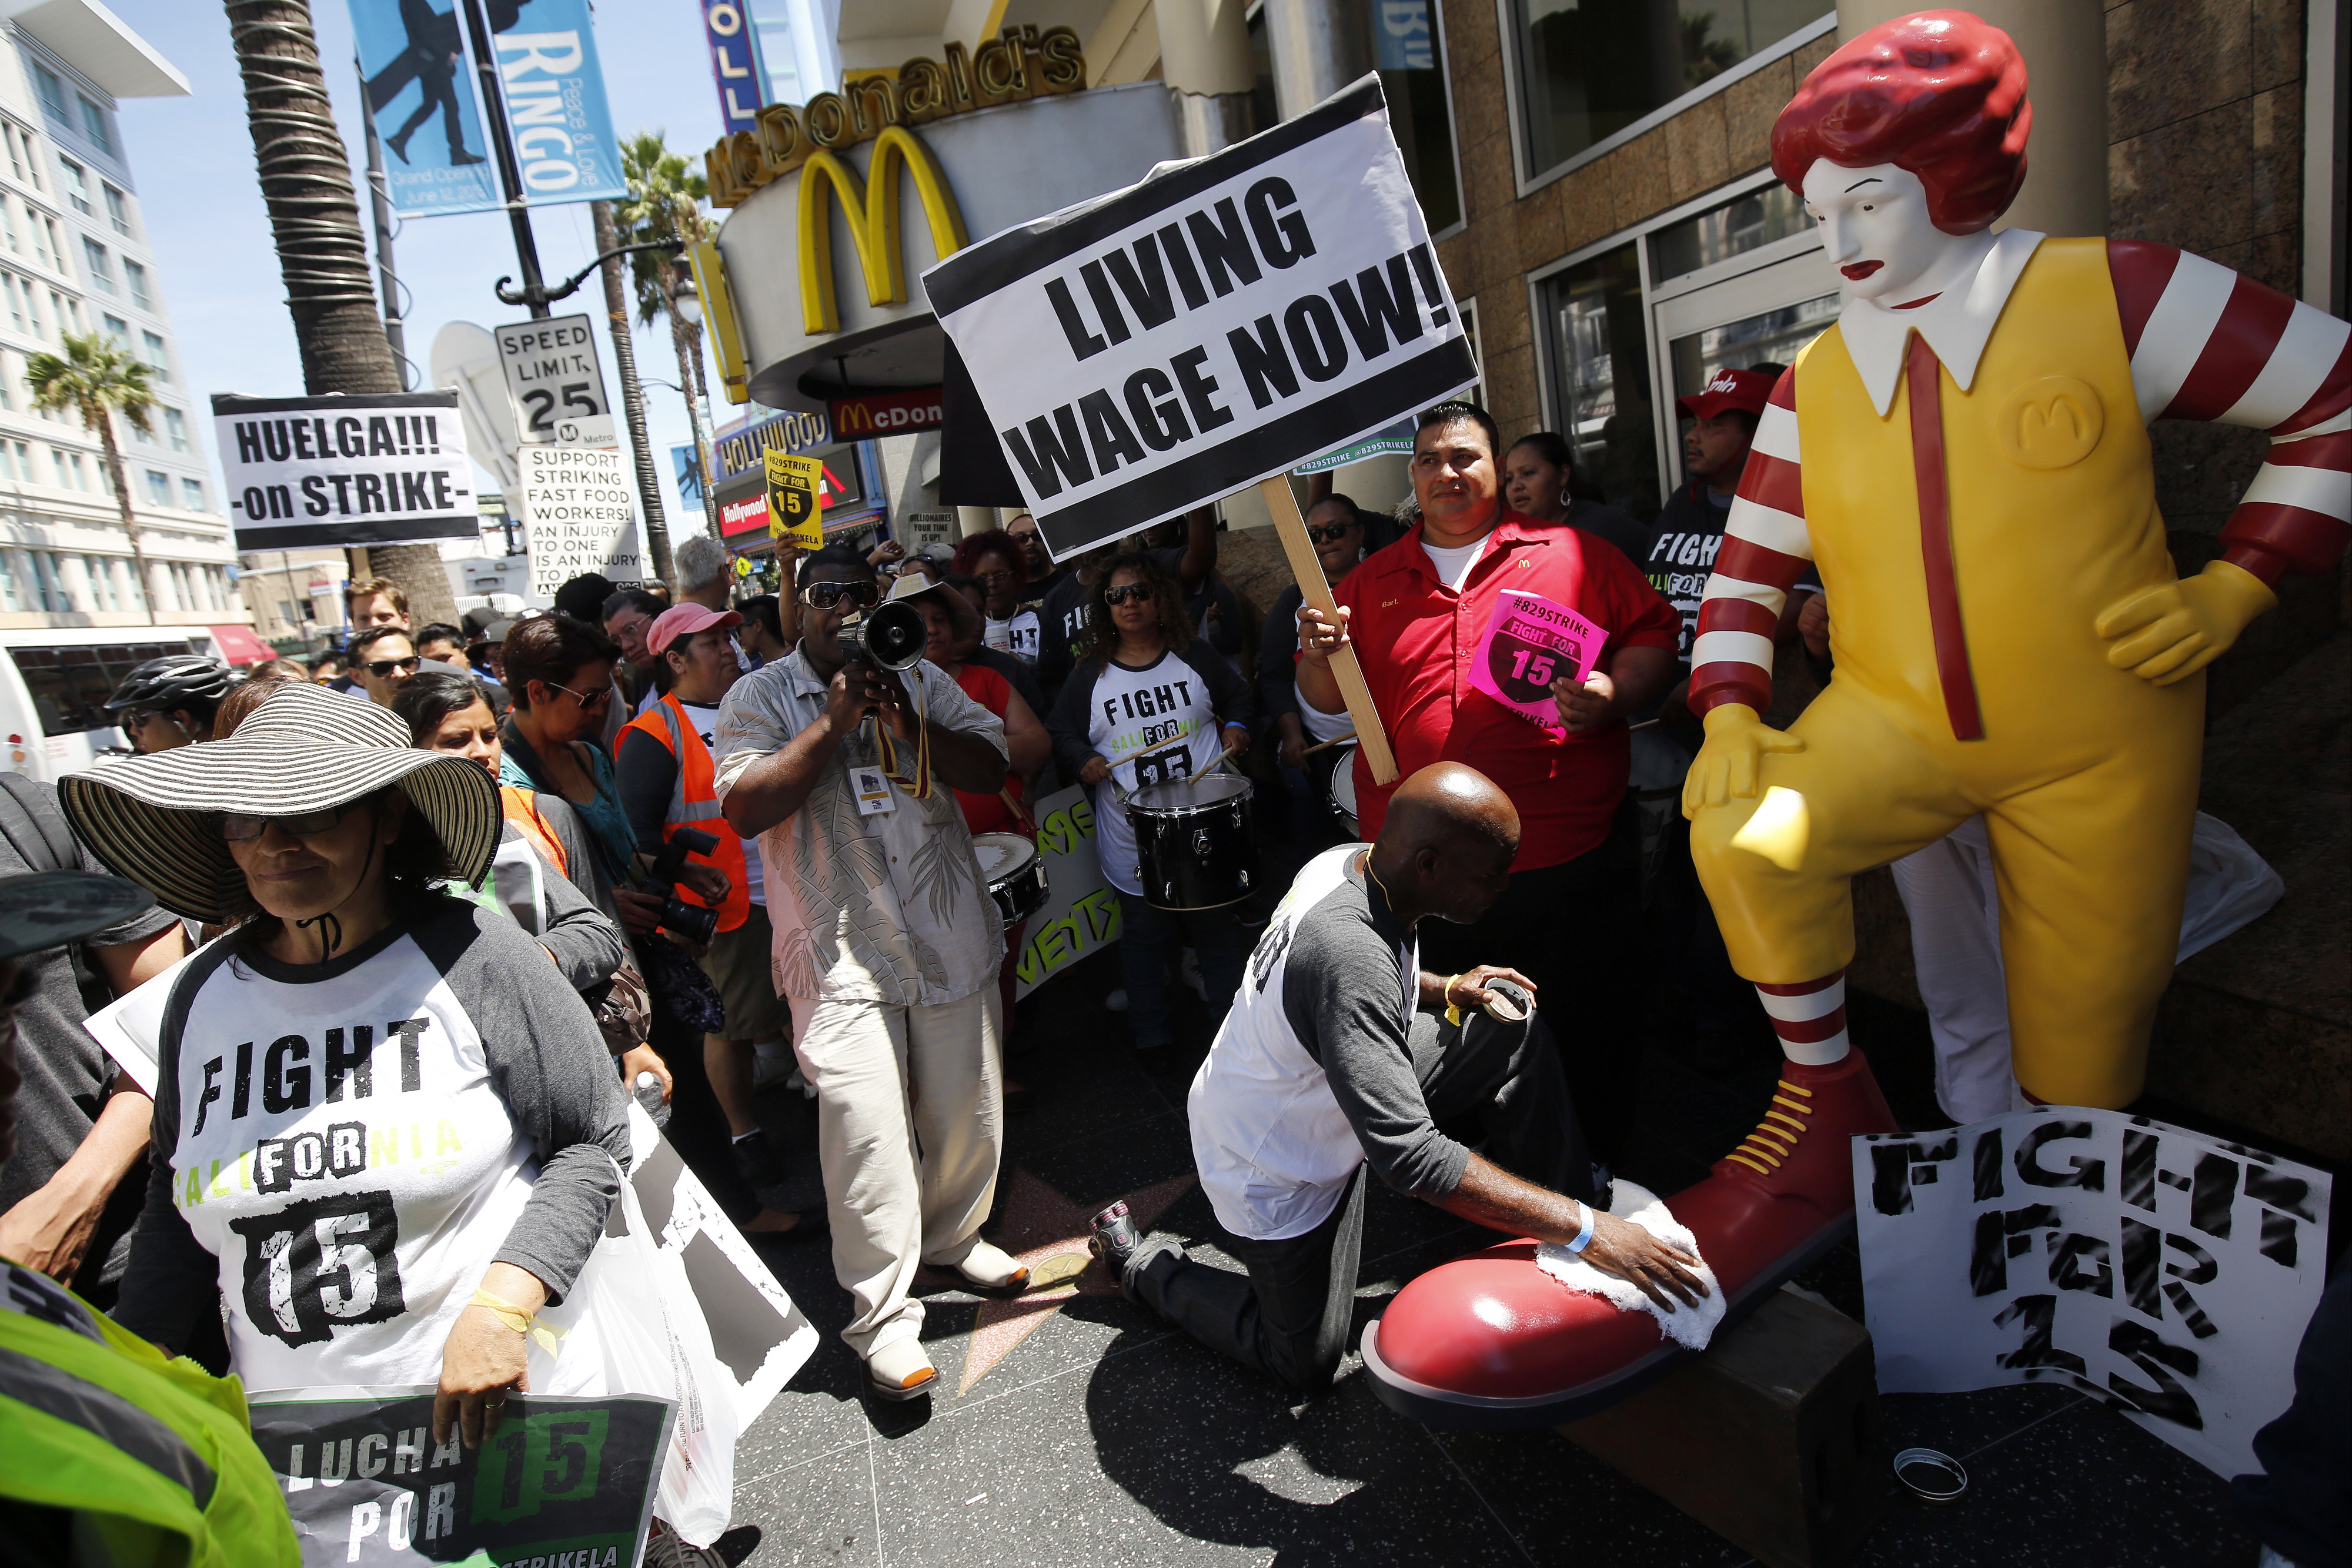 Robert Wideman, a maintenance mechanic at McDonalds Corp., shines the shoes of a Ronald McDonald statue outside of a restaurant while protesting with fast-food workers and supporters organized by the Service Employees International Union (SEIU) in Los Angeles, California, U.S., on Thursday, Aug. 29, 2013. (Bloomberg&mdash;Bloomberg via Getty Images)